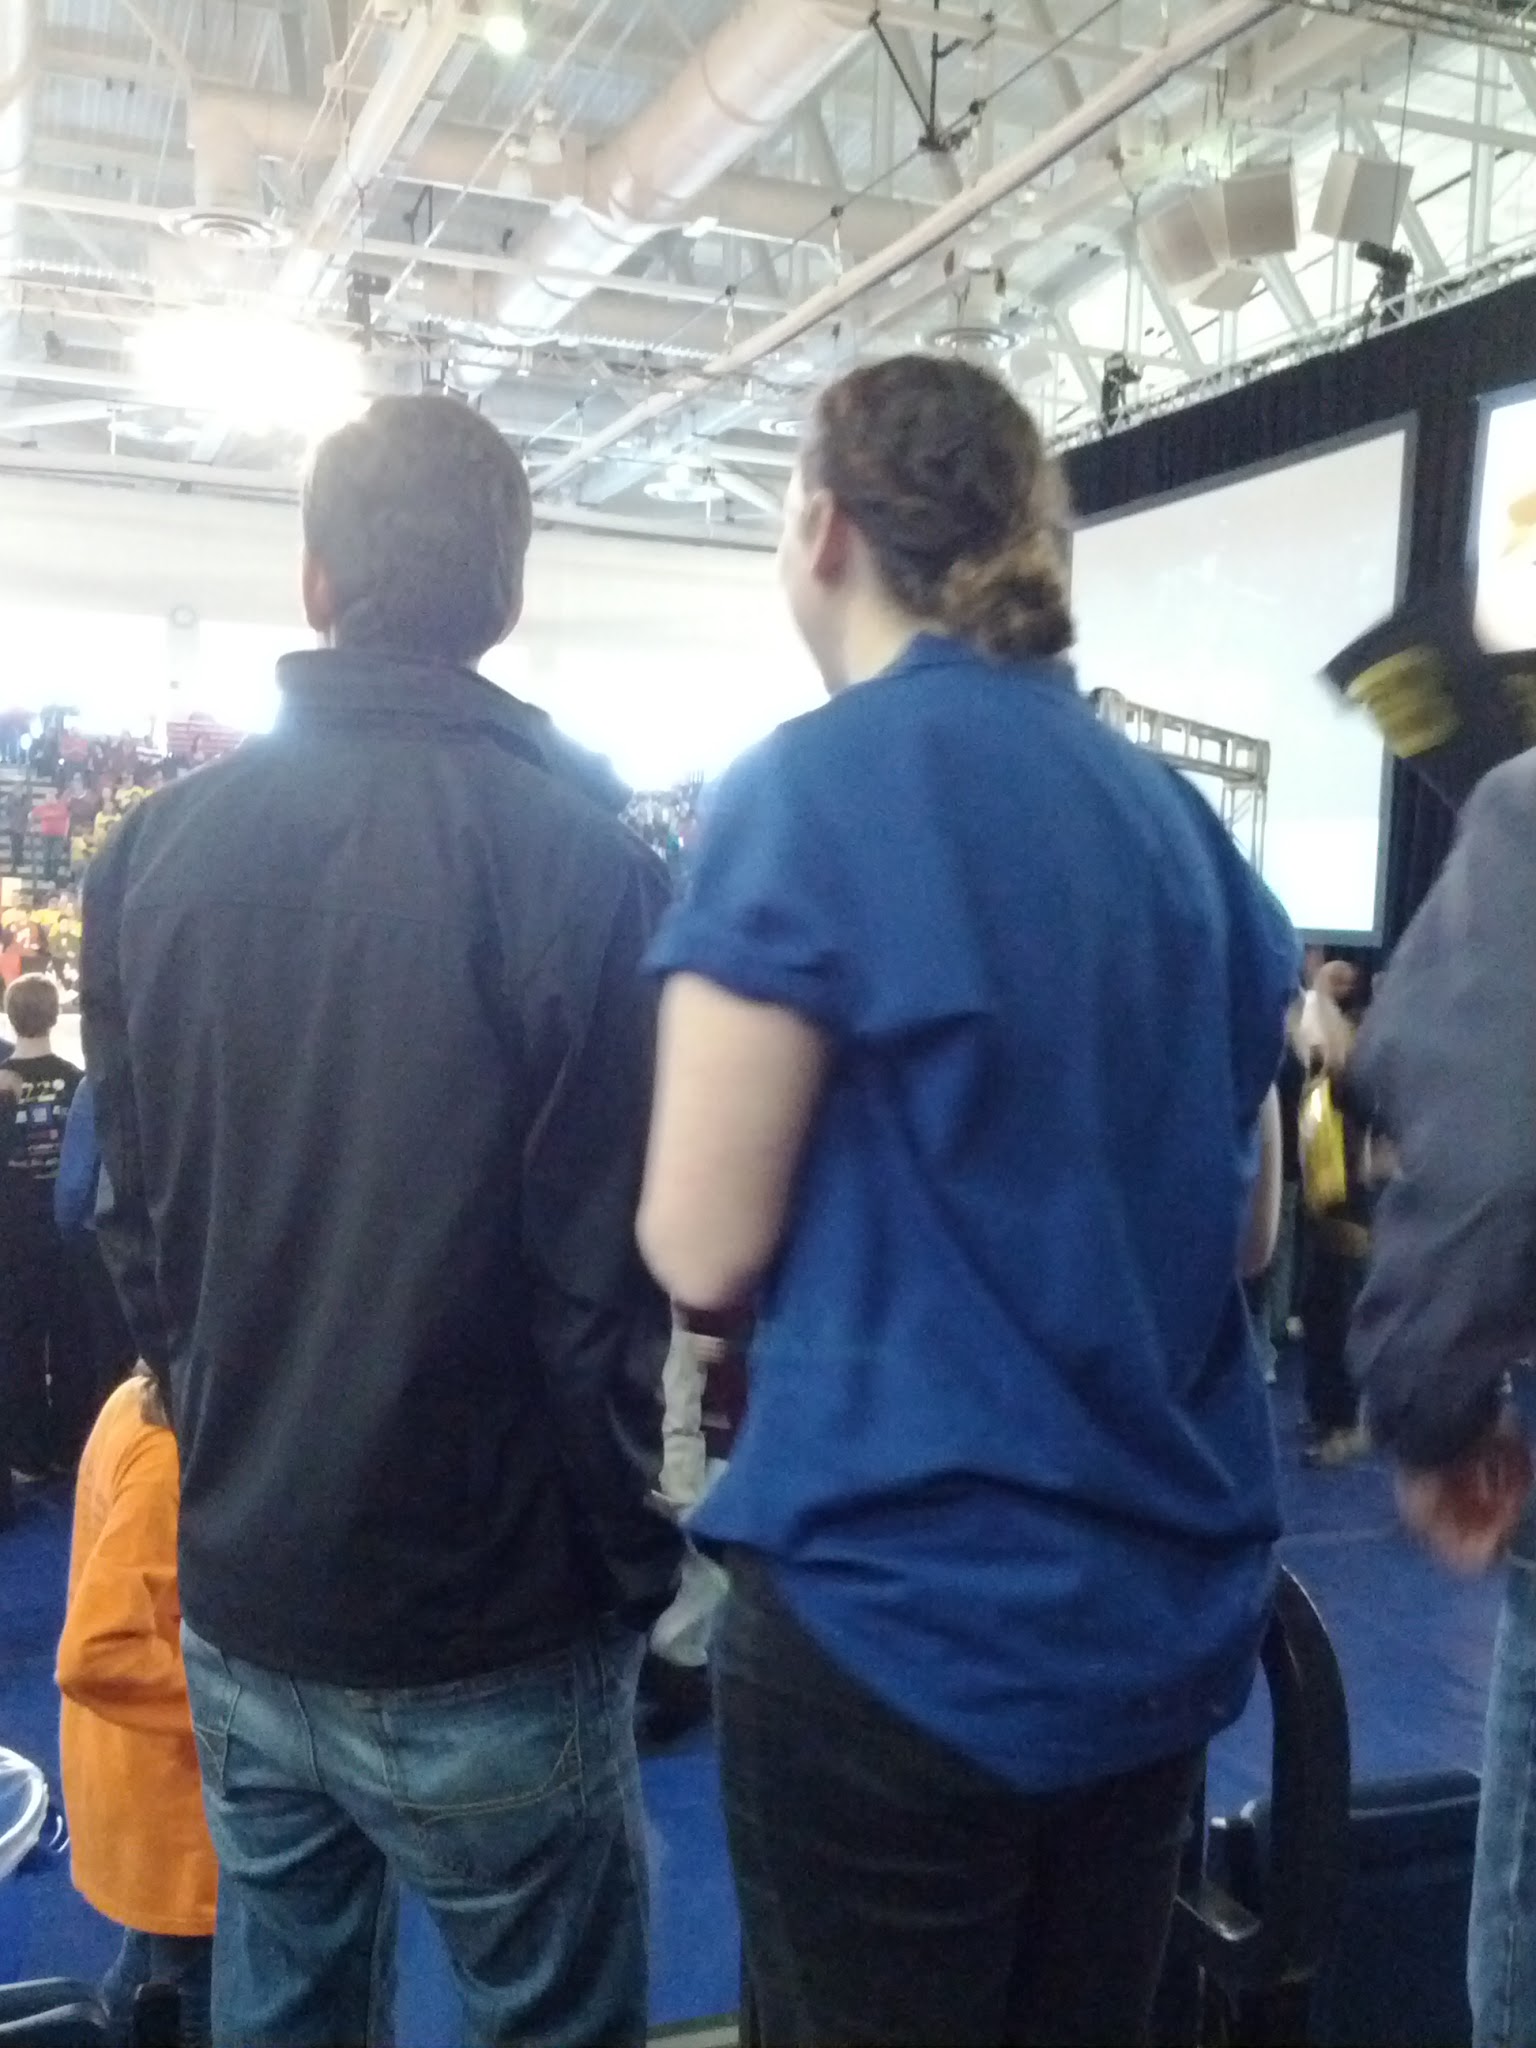 Tenrehte CEO Jennifer Indovina & Senior Engineer Carlos Barrios @ Rebound Rumble, the 2012 FIRST Robotics Competition at RIT